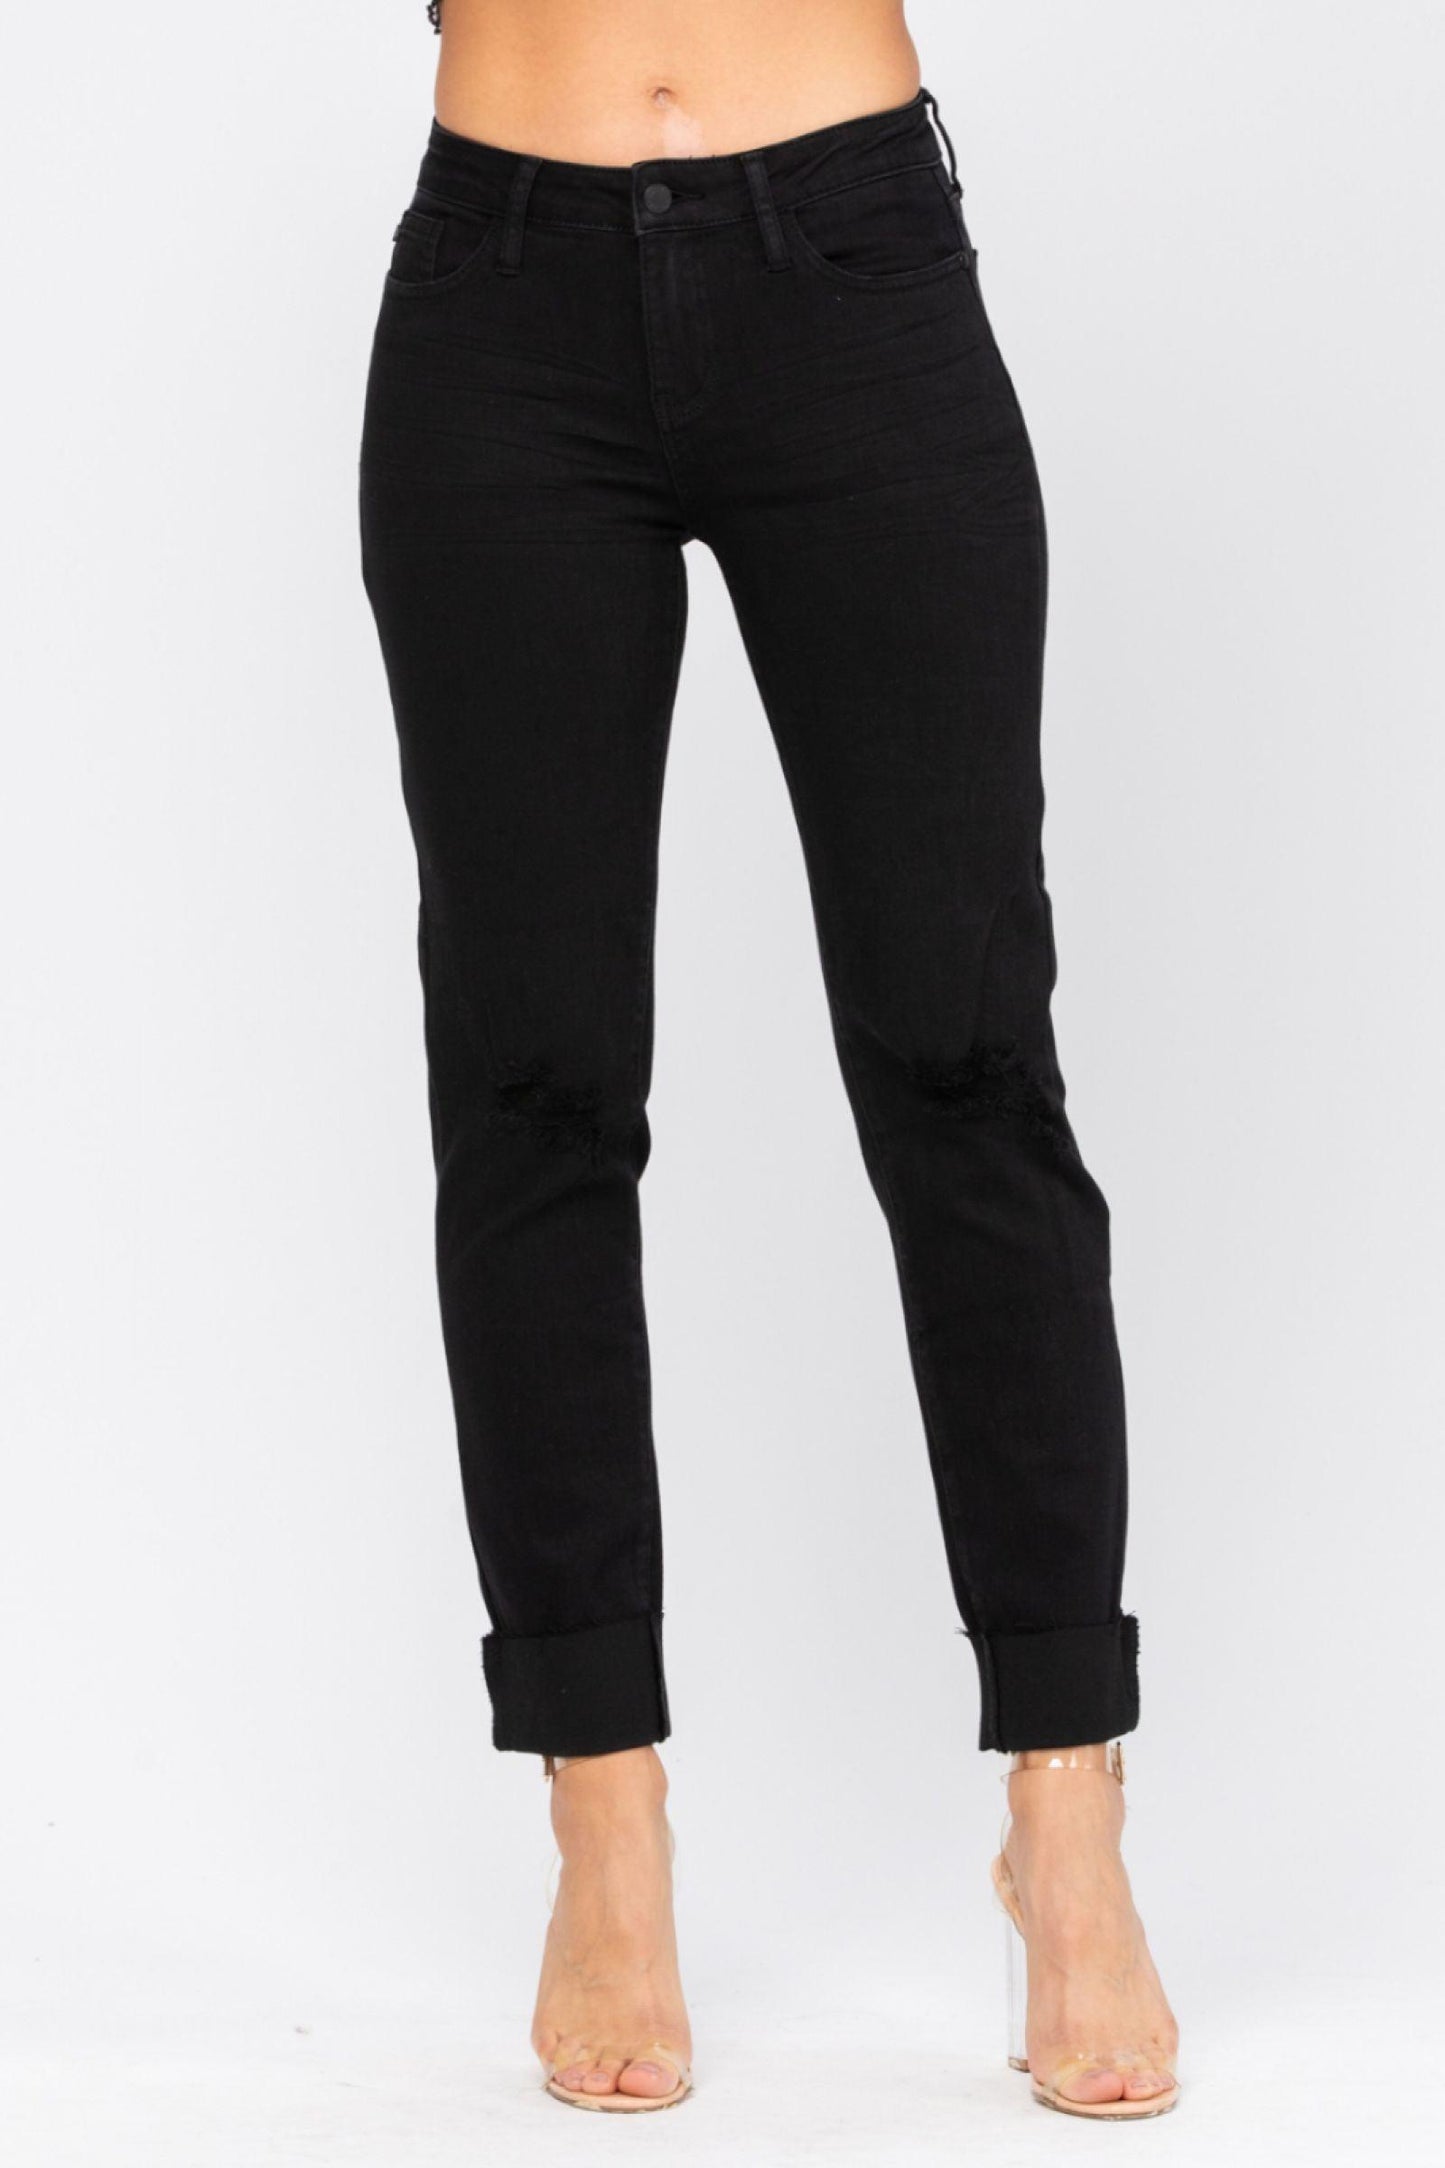 Judy Blue Black Mid-Rise Destroyed Slim Straight Jeans - Strawberry Moon Boutique